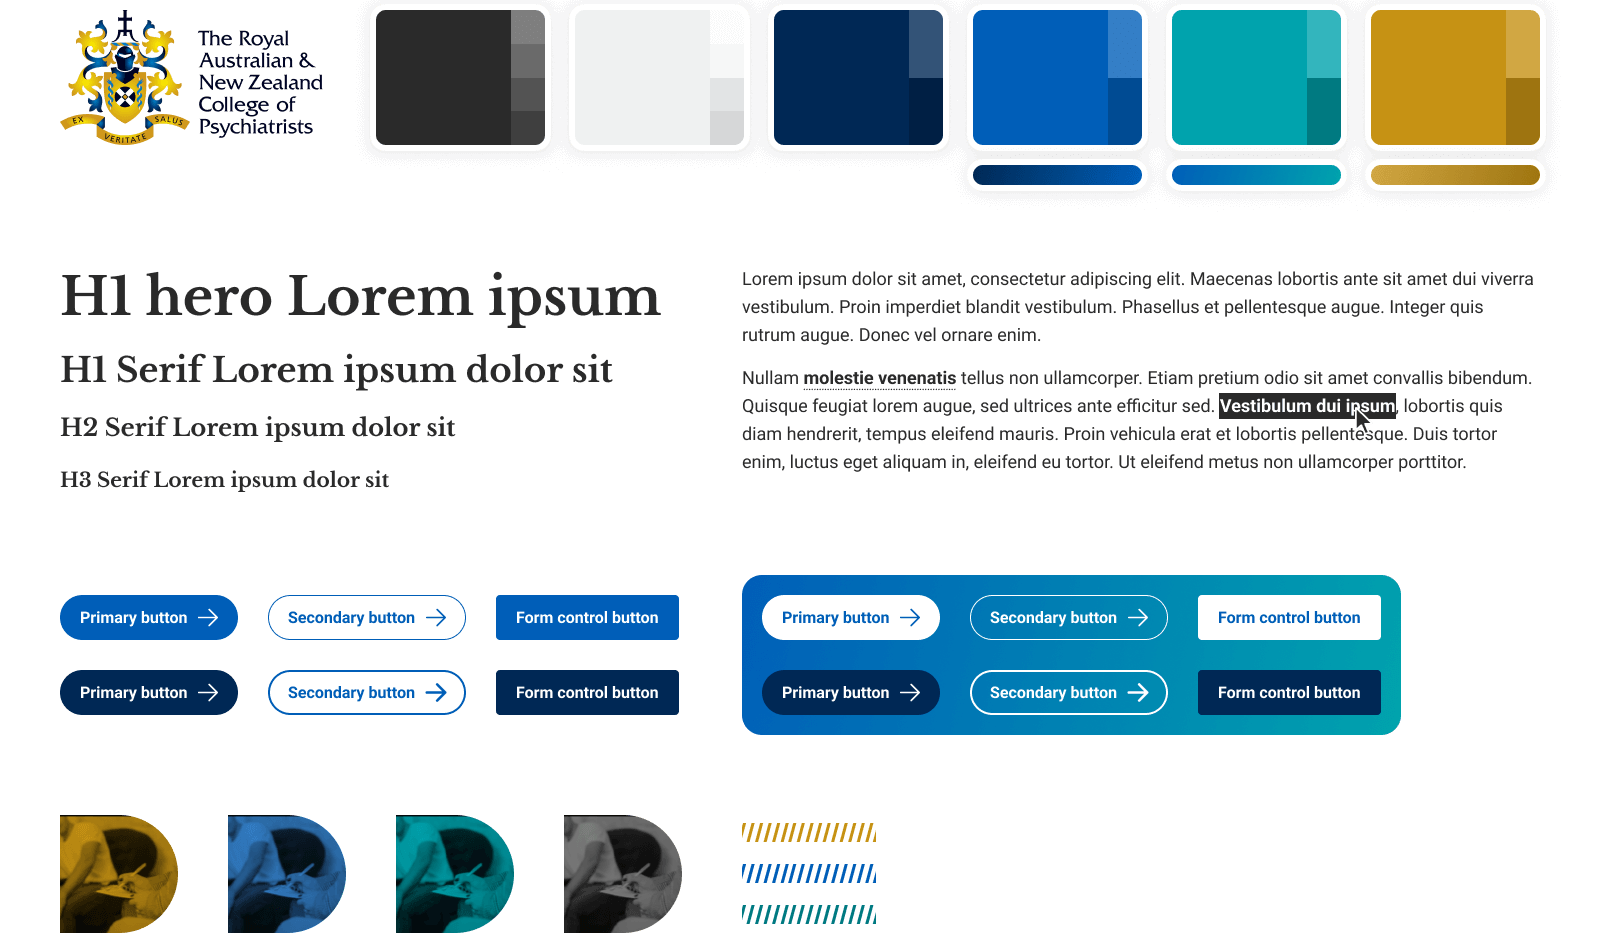 RANZCP design system including colours, text and button styles